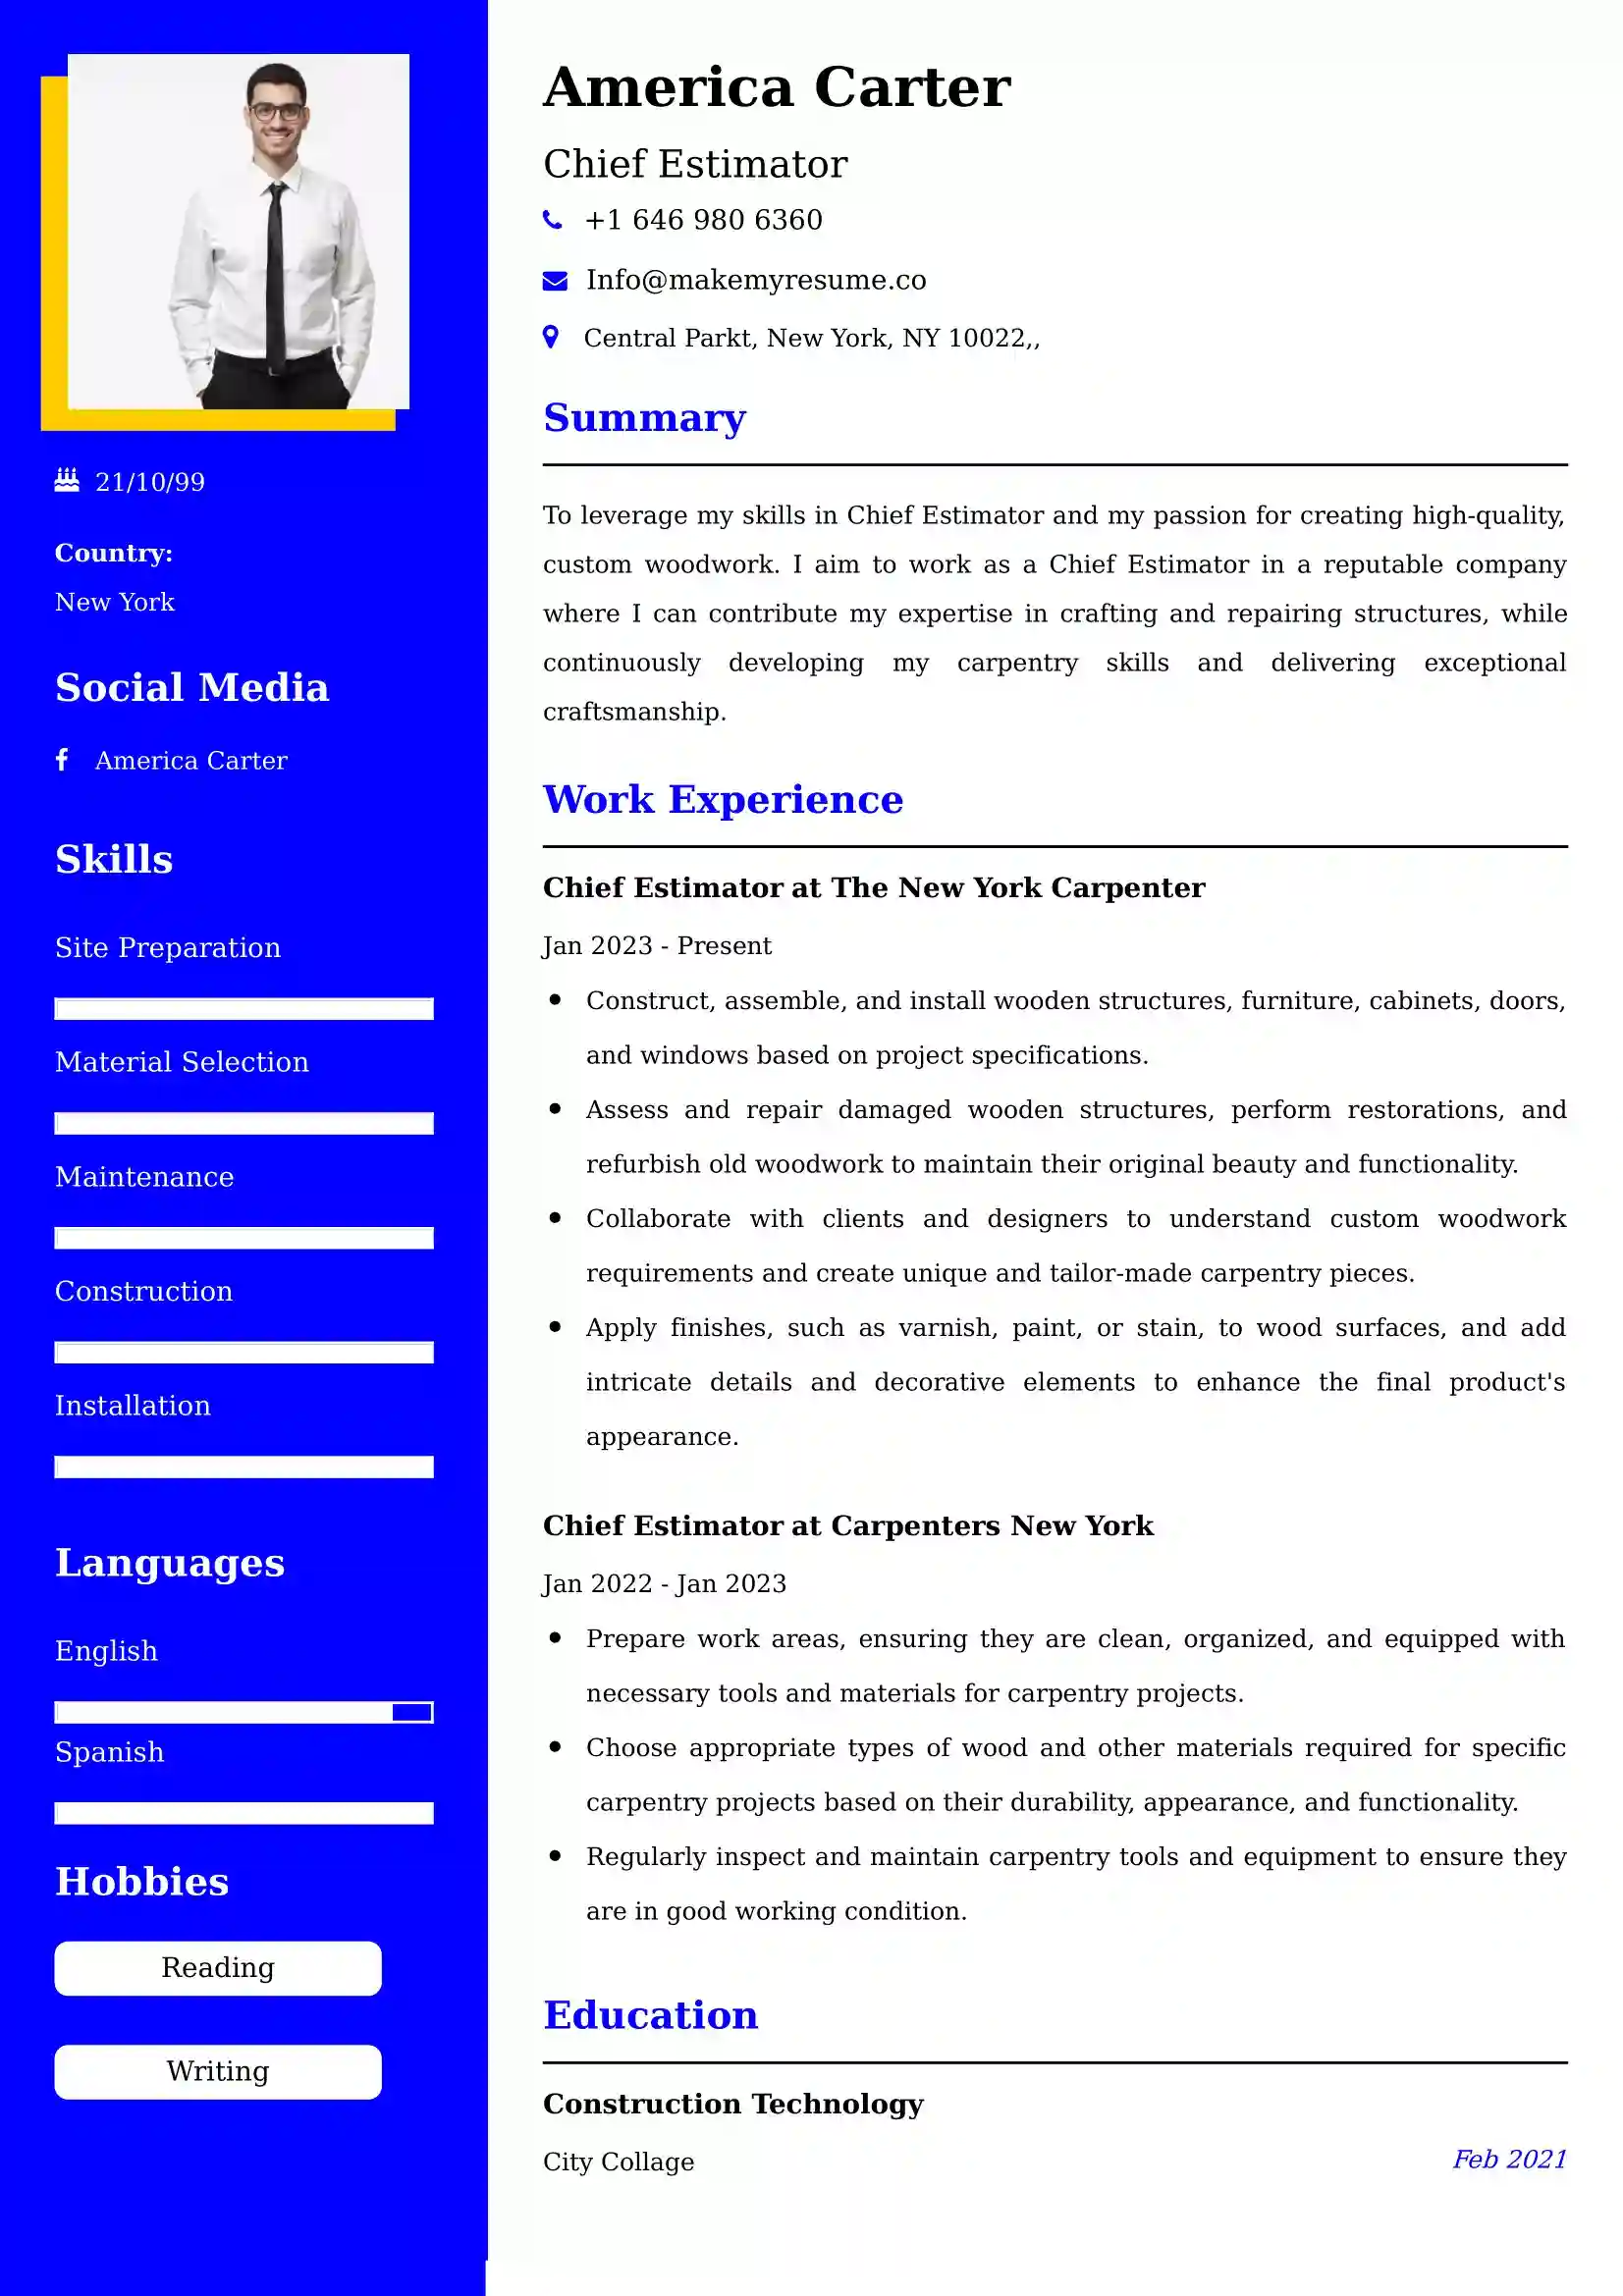 Chief Estimator Resume Examples for UK Jobs - Tips and Guide